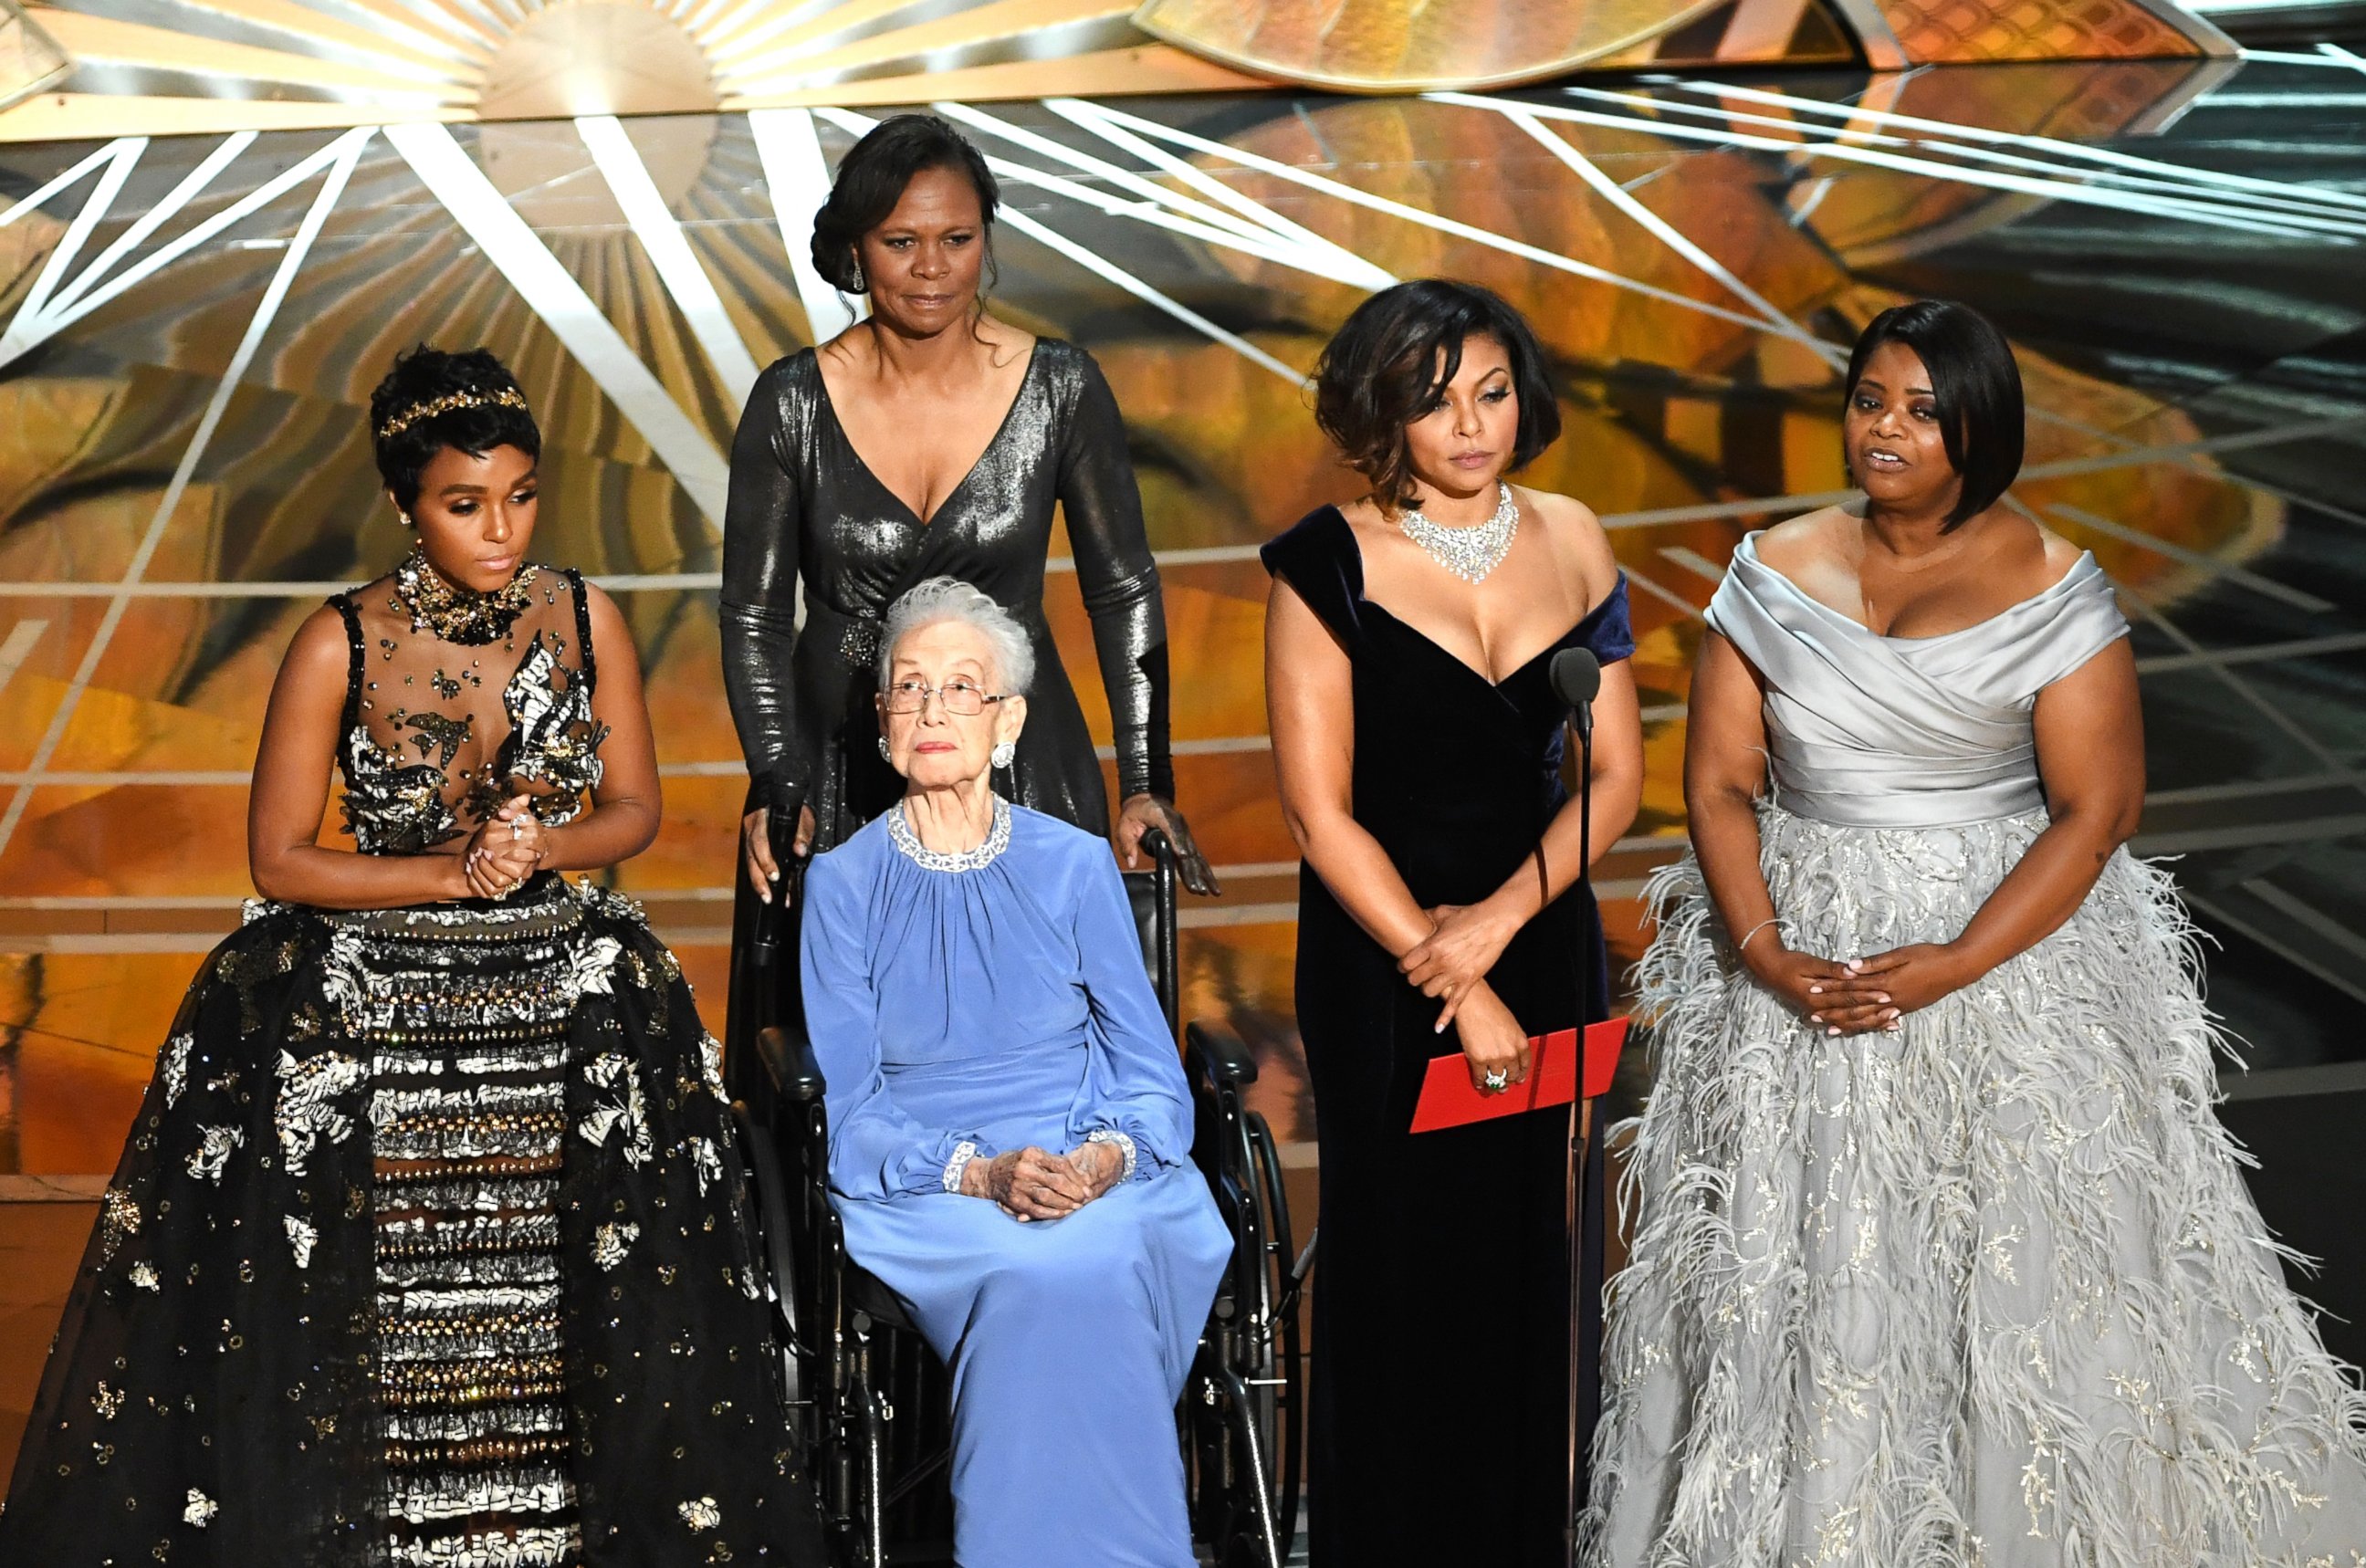 PHOTO: NASA mathematician Katherine Johnson (2nd L) appears onstage with (L-R) actors Janelle Monae, Taraji P. Henson and Octavia Spencer during the 89th Annual Academy Awards at Hollywood & Highland Center, on Feb. 26, 2017, in Hollywood, Calif. 